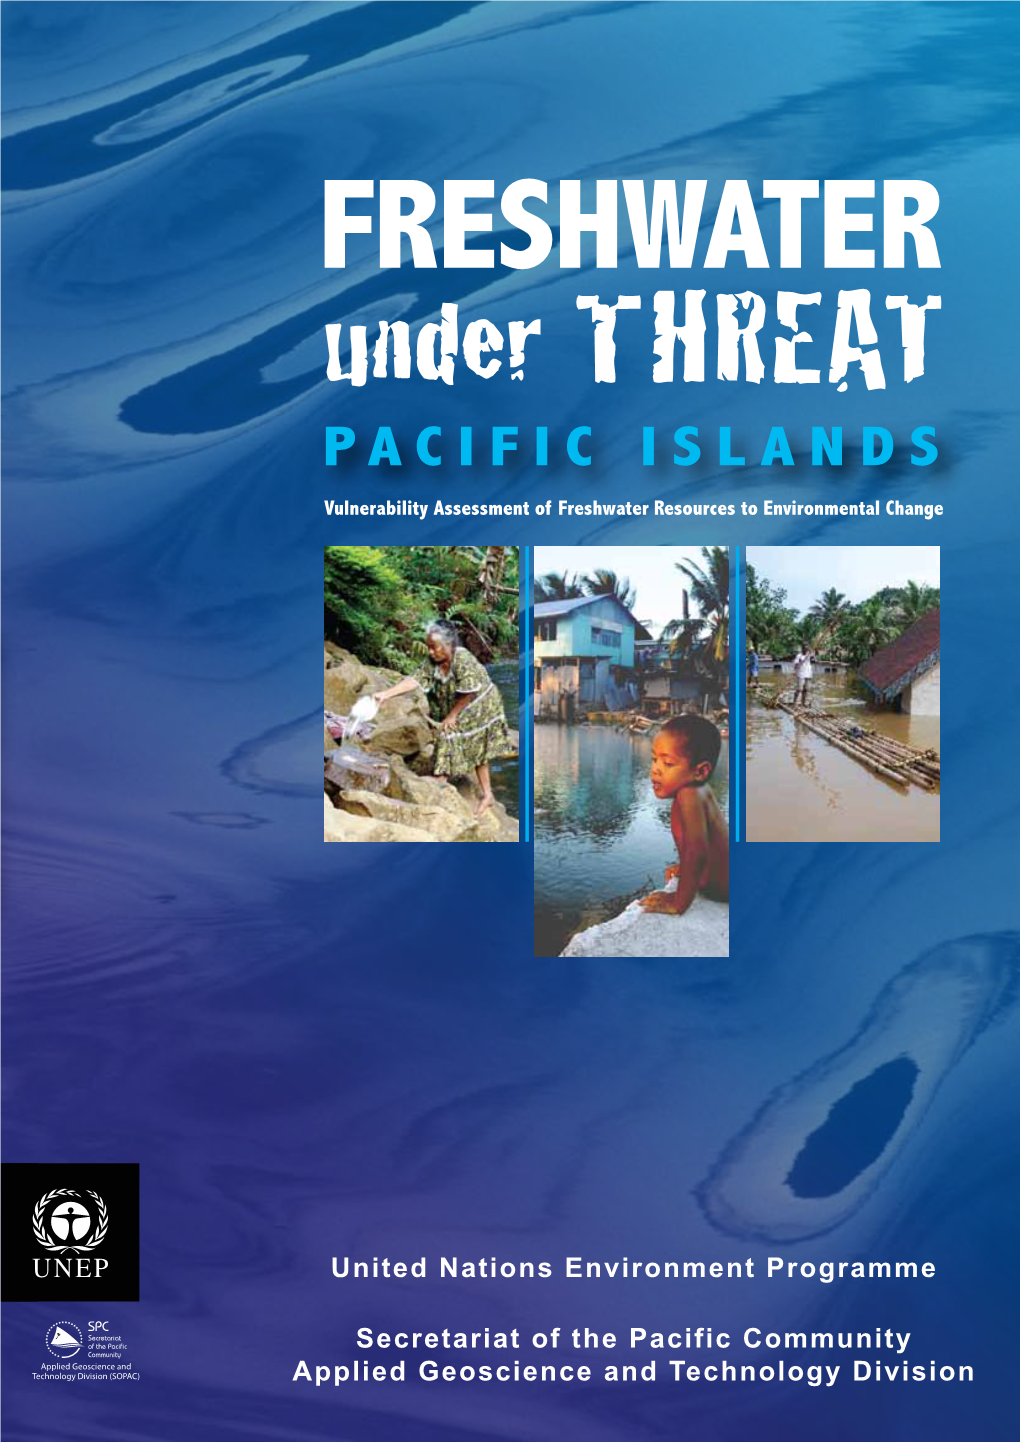 PACIFIC ISLANDS Vulnerability Assessment of Freshwater Resources to Environmental Change